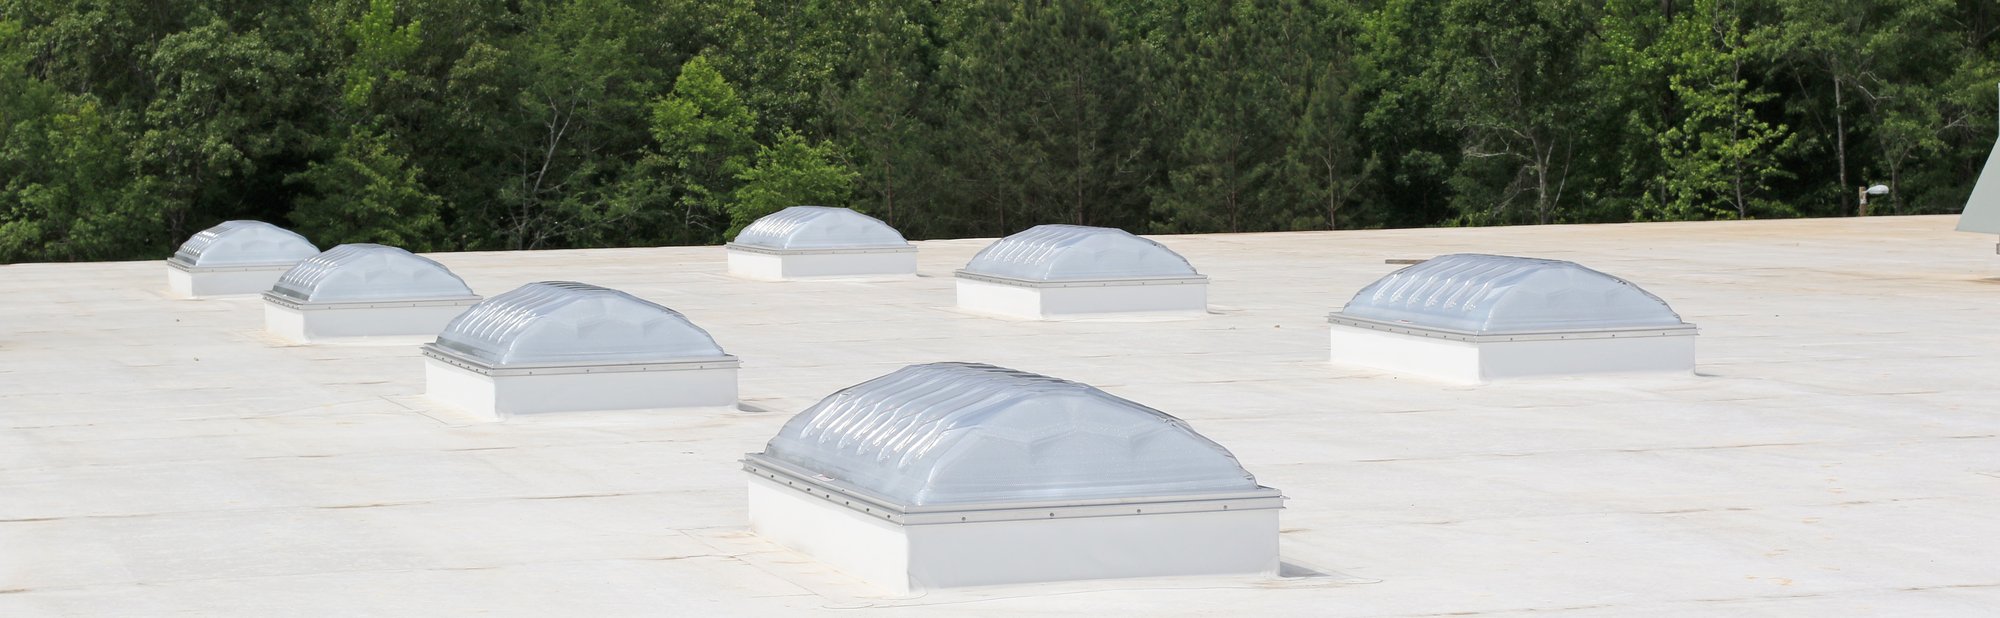 Application-clear-over-prismatic-3769-cd2-Dome-Unit-Skylights-Dynamic-Dome-0521-5472x1693